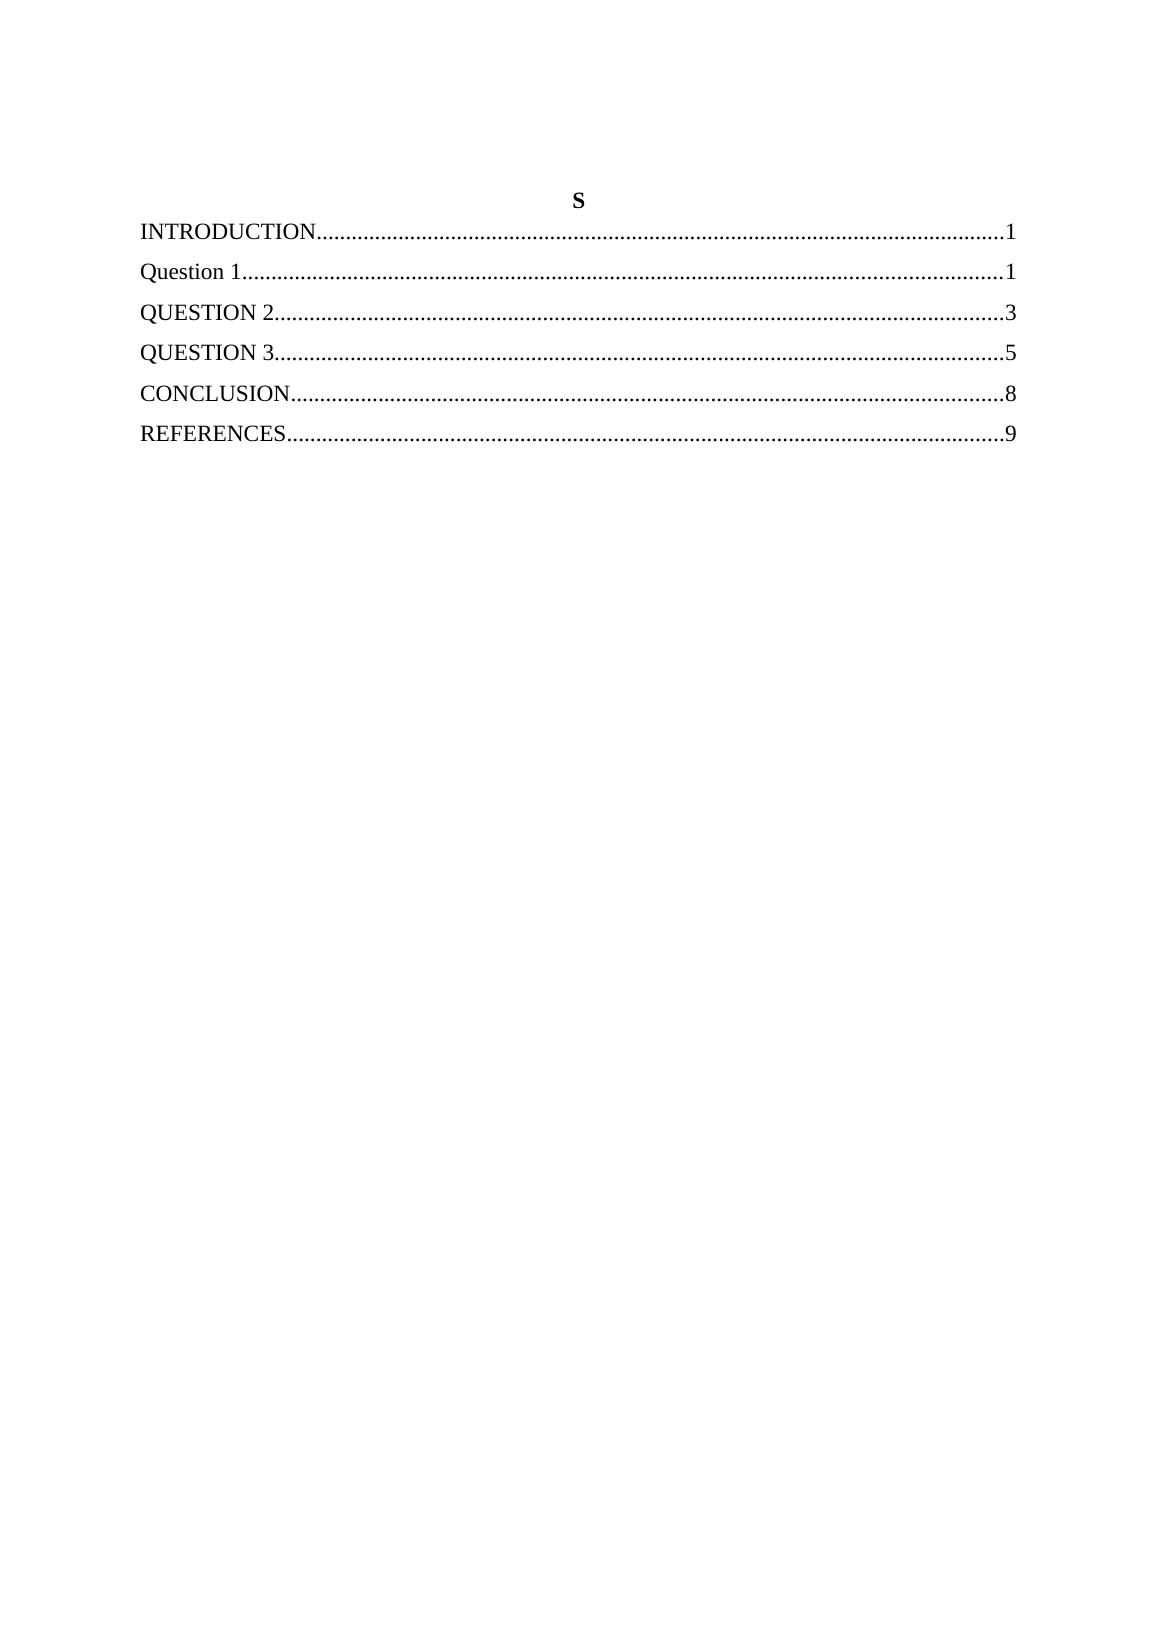 Taxation TABLE OF CONTENTS_2